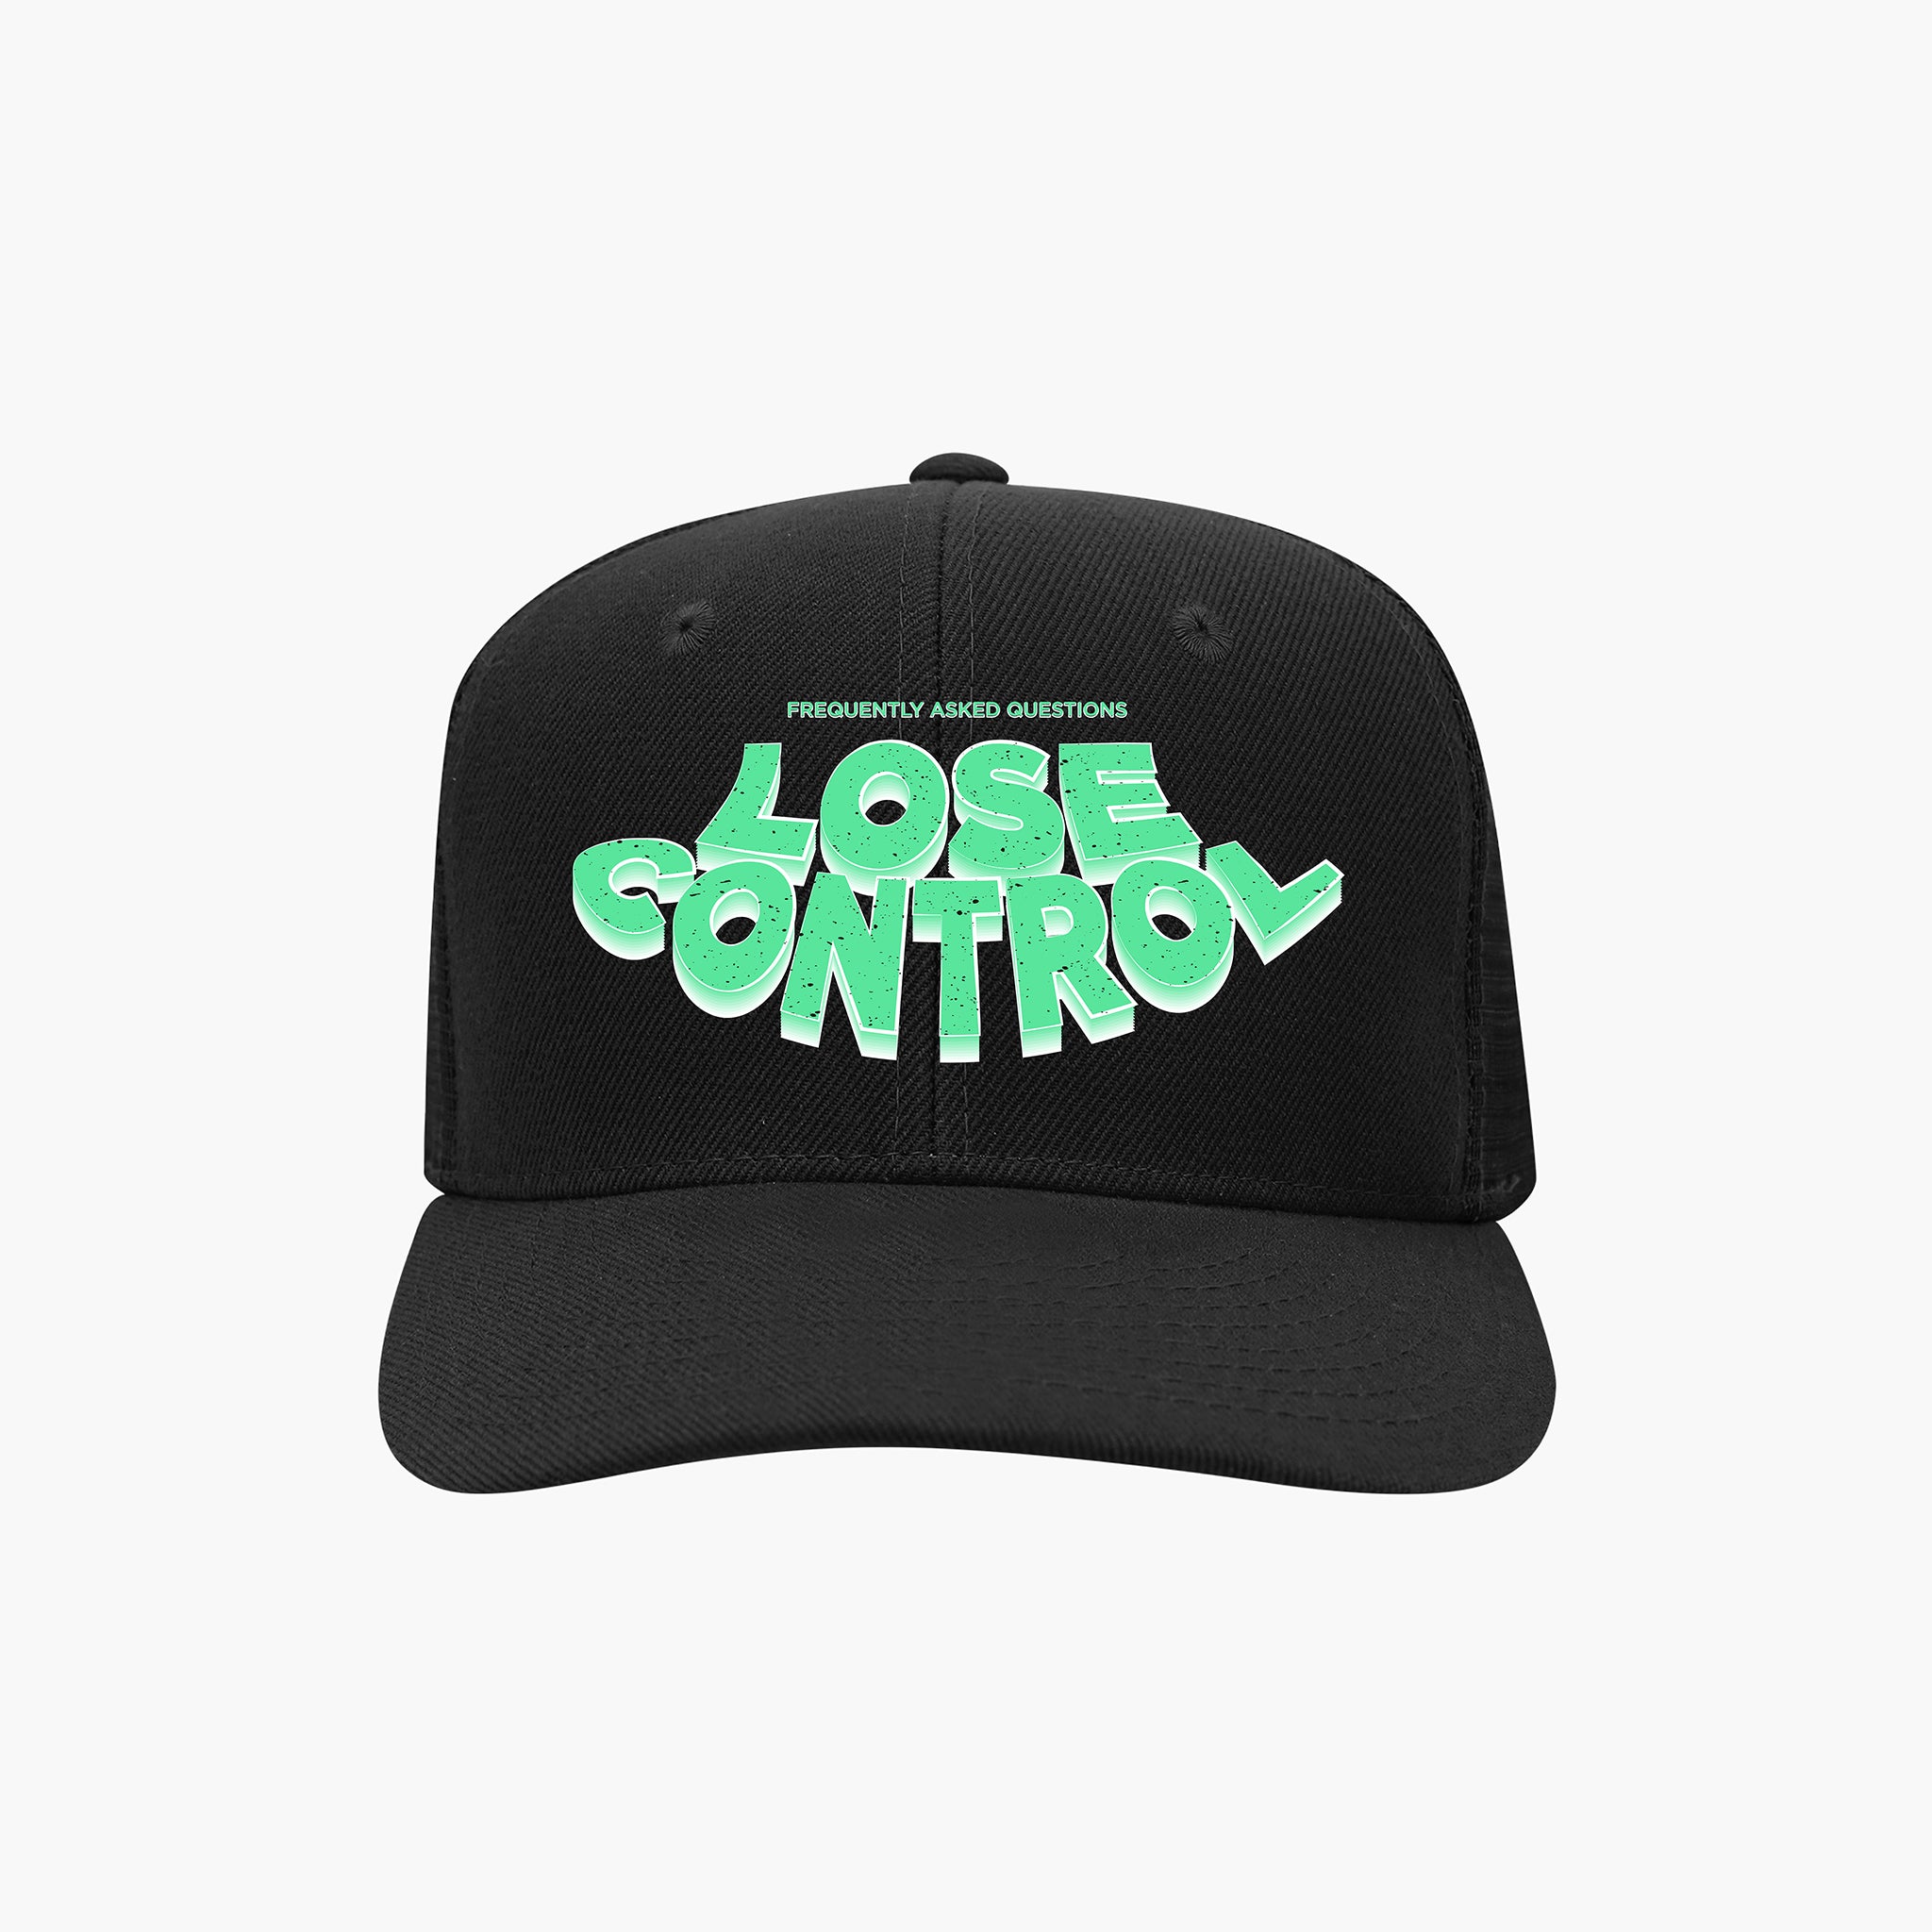 Lose Control Trucker Hat - Frequently Asked Questions